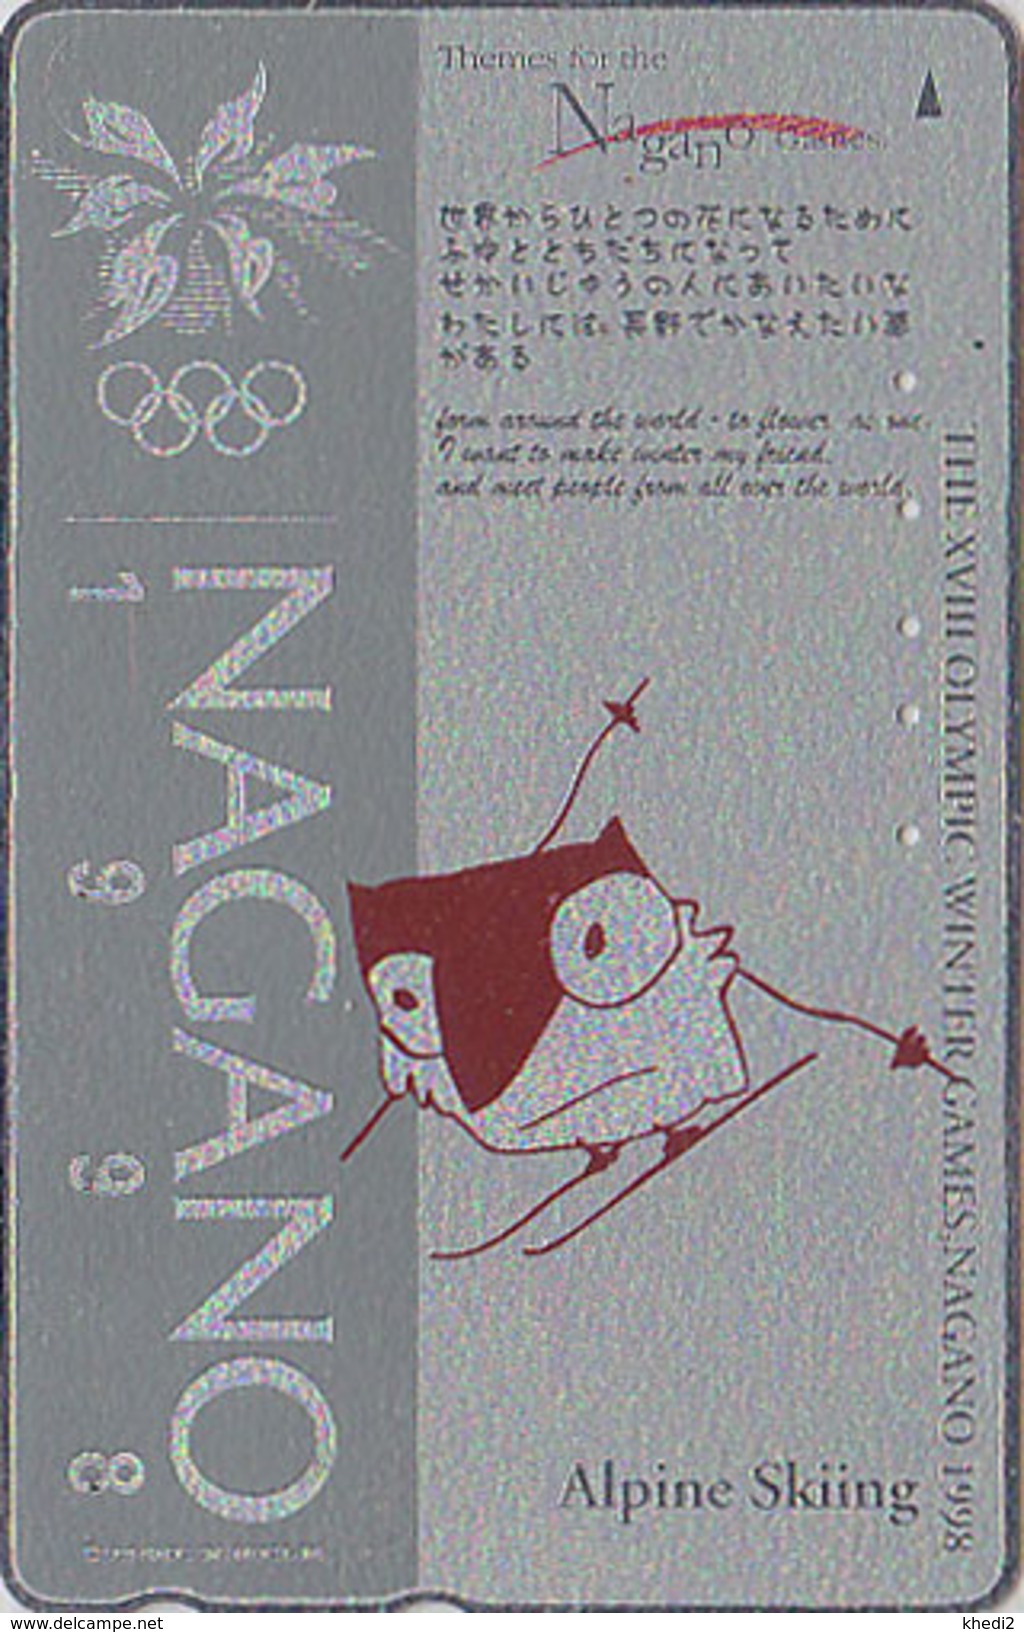 TC ARGENT JAPON / 271-03298 - HIBOU Jeux Olympiques NAGANO SKI ALPIN - OWL OLYMPIC GAMES JAPAN SILVER Free Pc - 3940 - Olympic Games